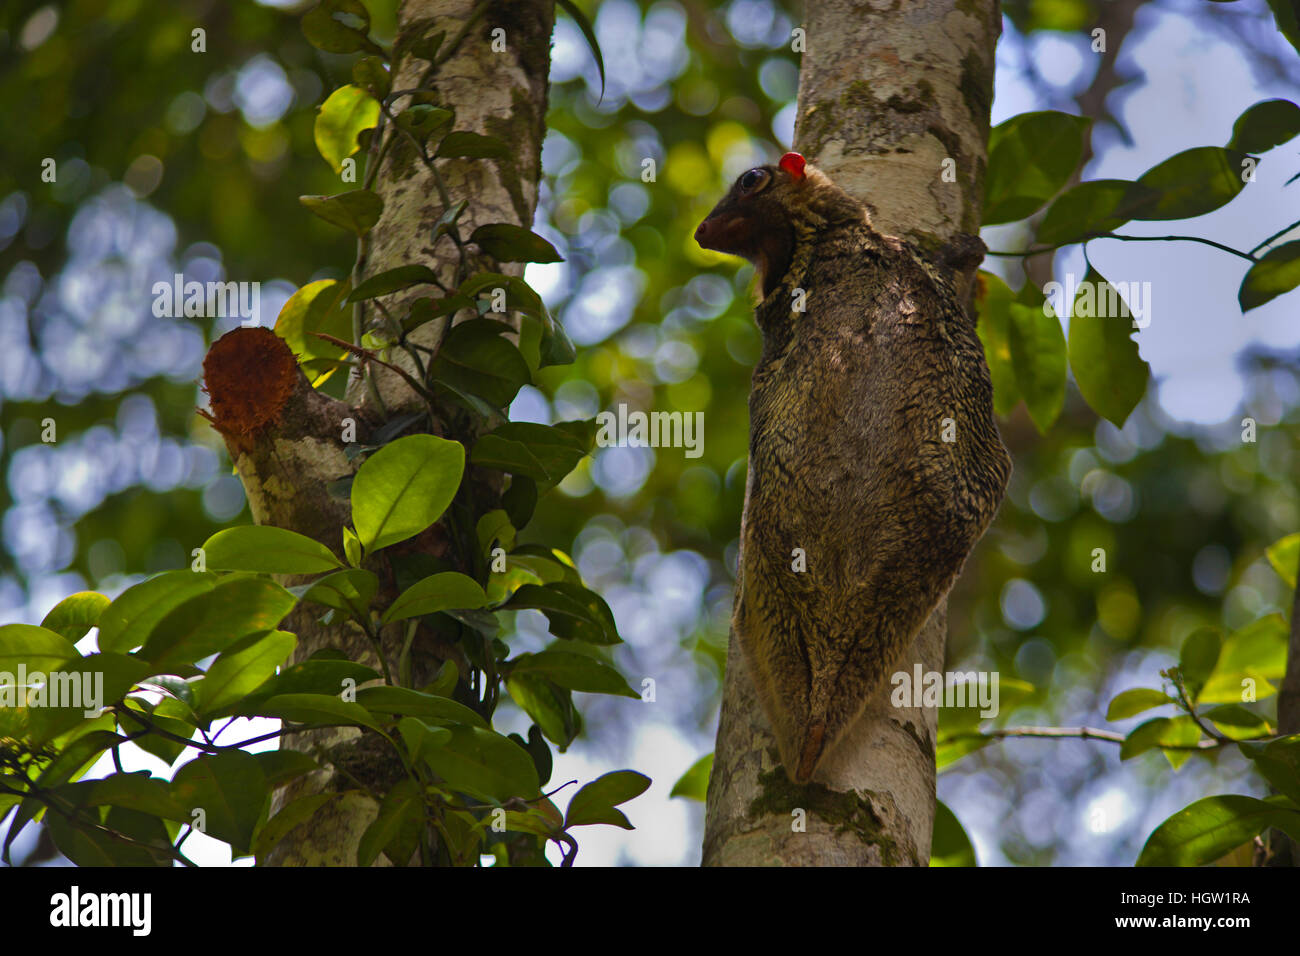 A Colugo Or Flying Lemur, Galeopterus Variegatus, On A Tree In Bako National Park Which Is Located In Sarawak, Borneo, Malaysia Stock Photo